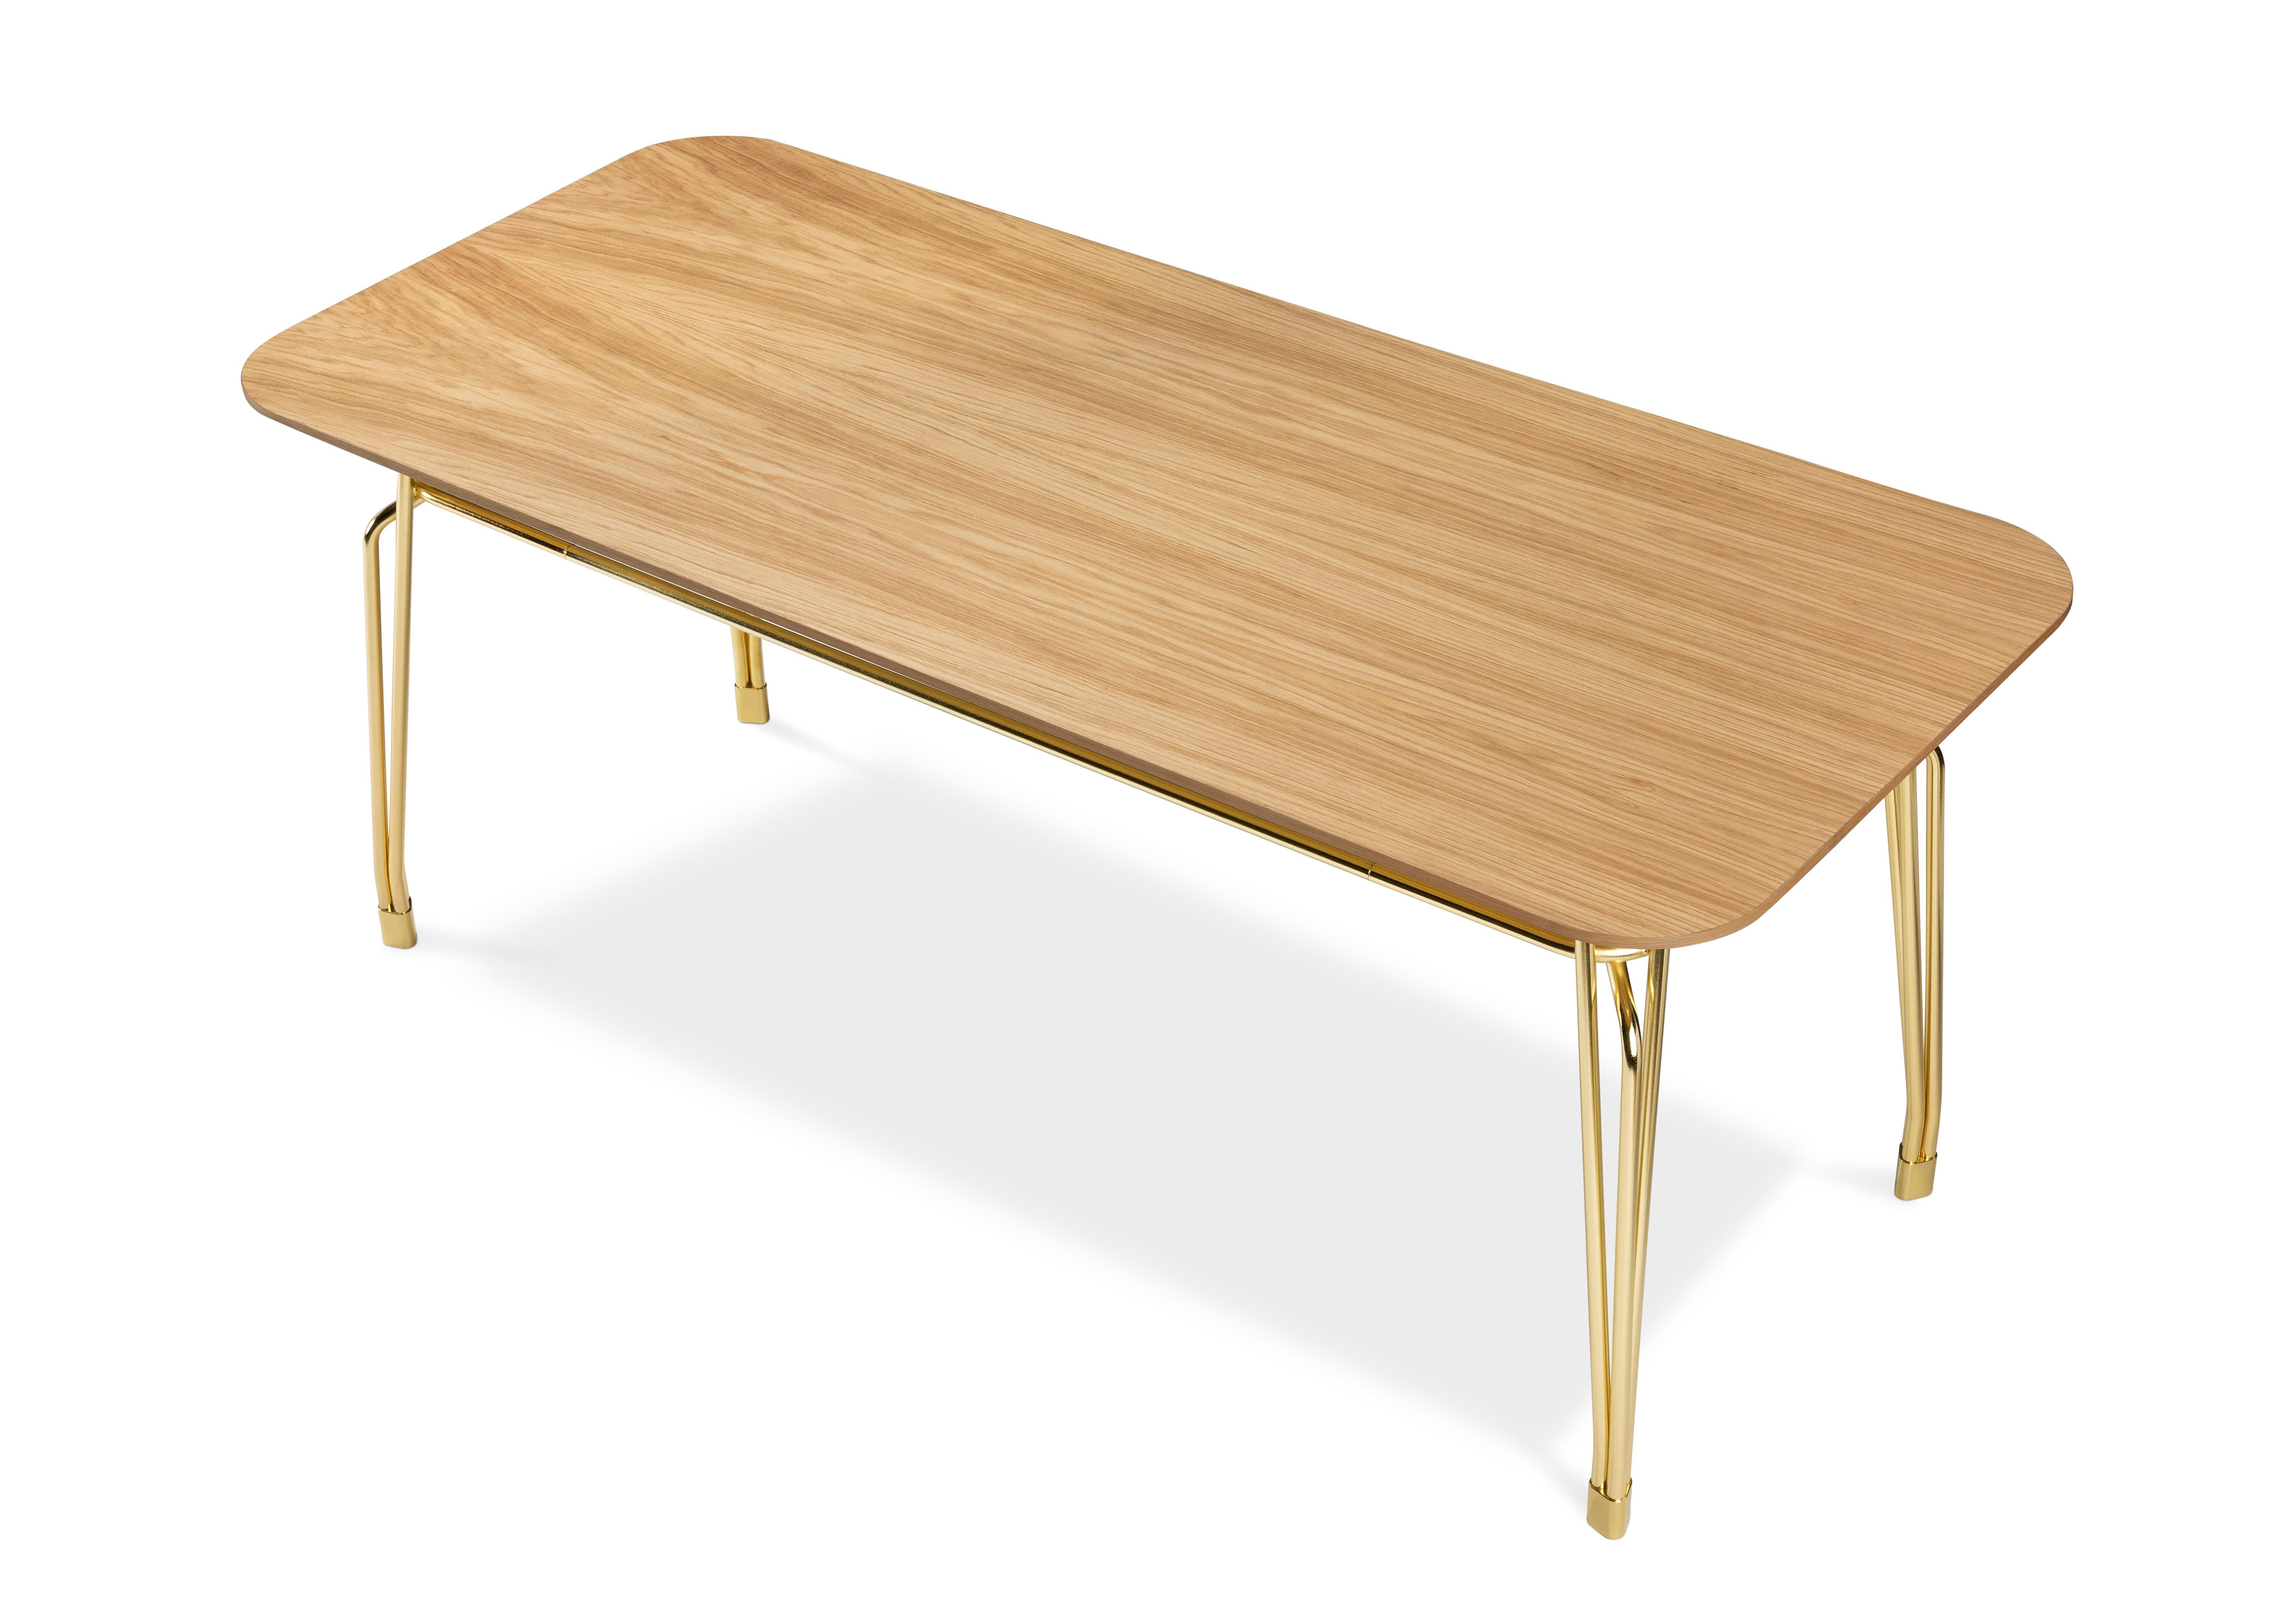 Italian Botany Dining Table in Striped Oak Top with Polished Brass Legs For Sale